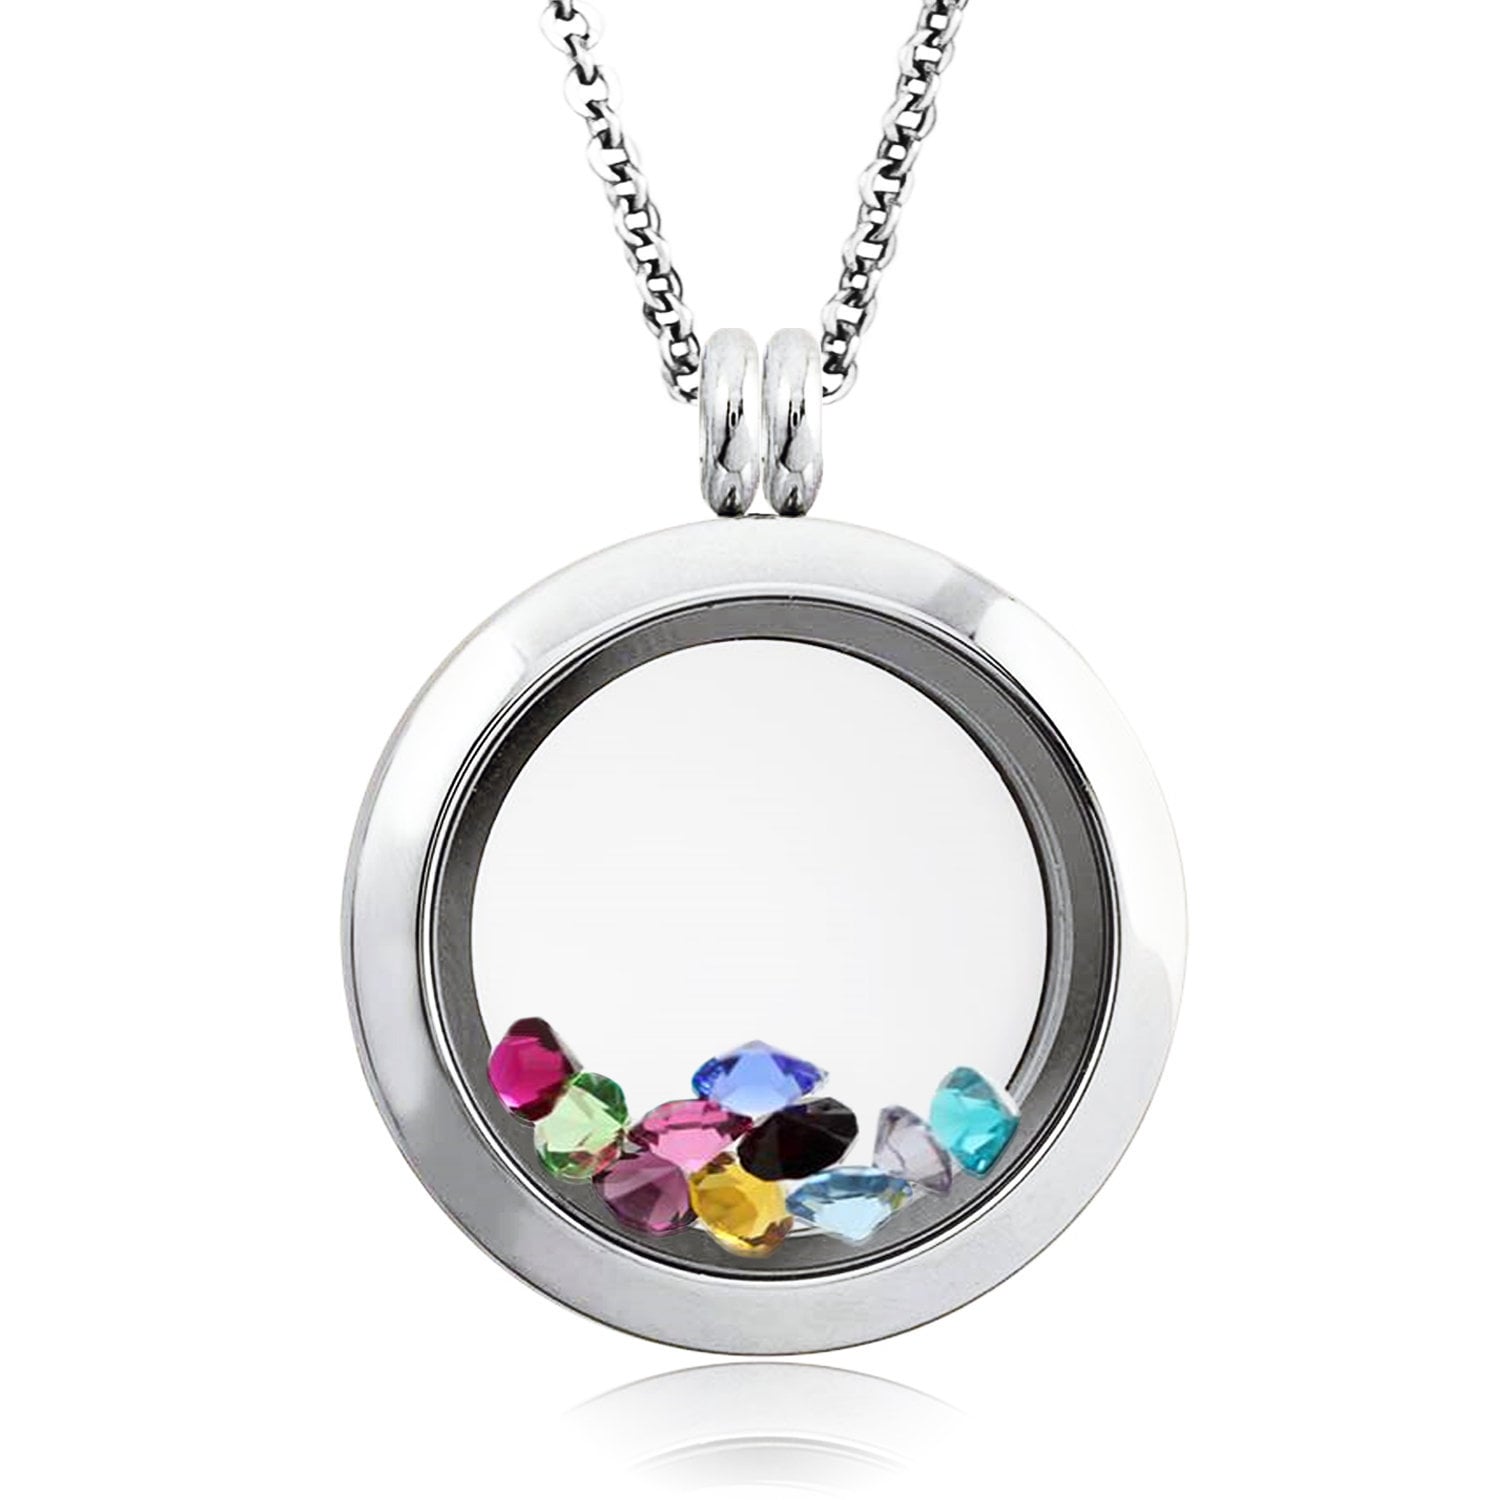 EVERLEAD Sparkle Floating Charms Locket Stainless Steel Screw Waterproof Pendant Necklace Including Chain and Birthstones 